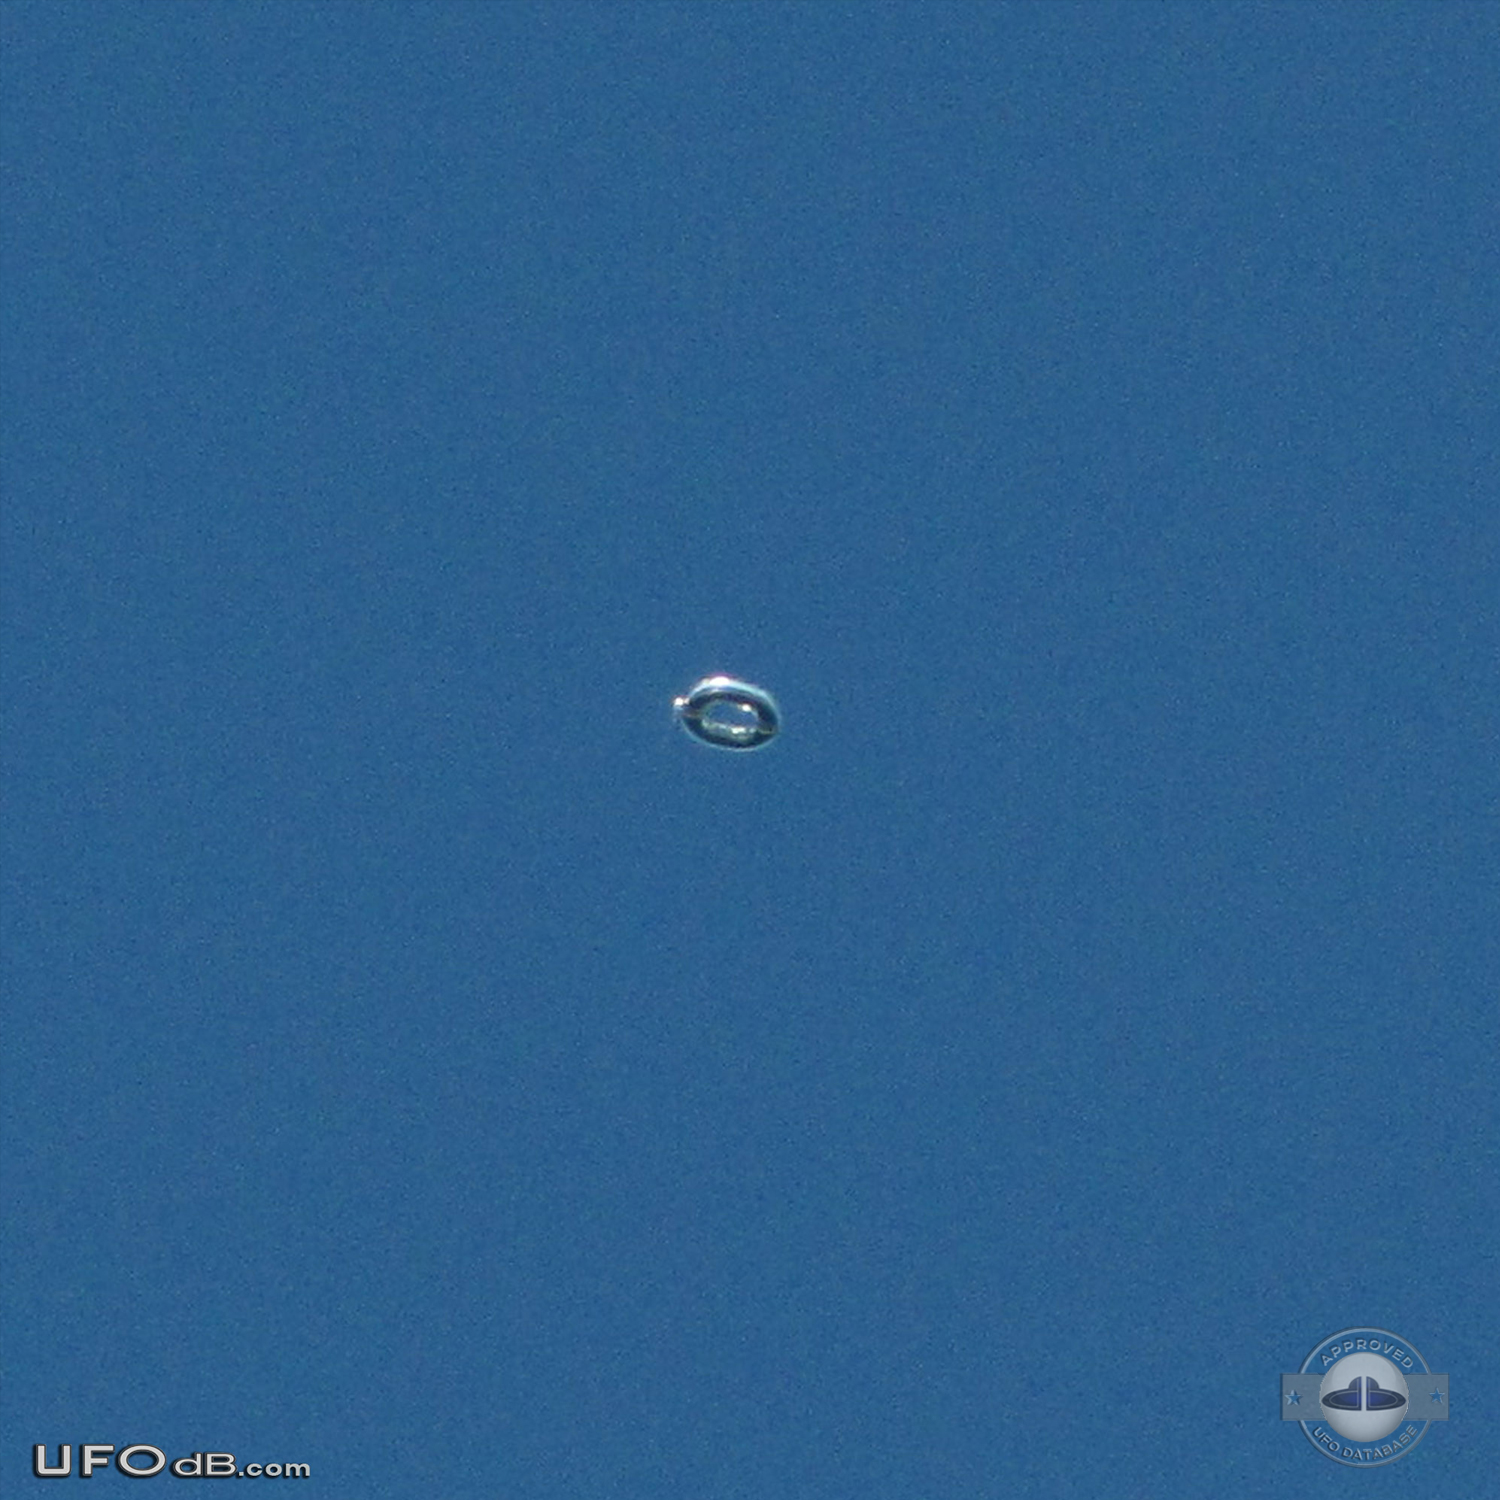 Donut shaped UFO with glowing silver material over Scituate Ma US 2012 UFO Picture #481-1